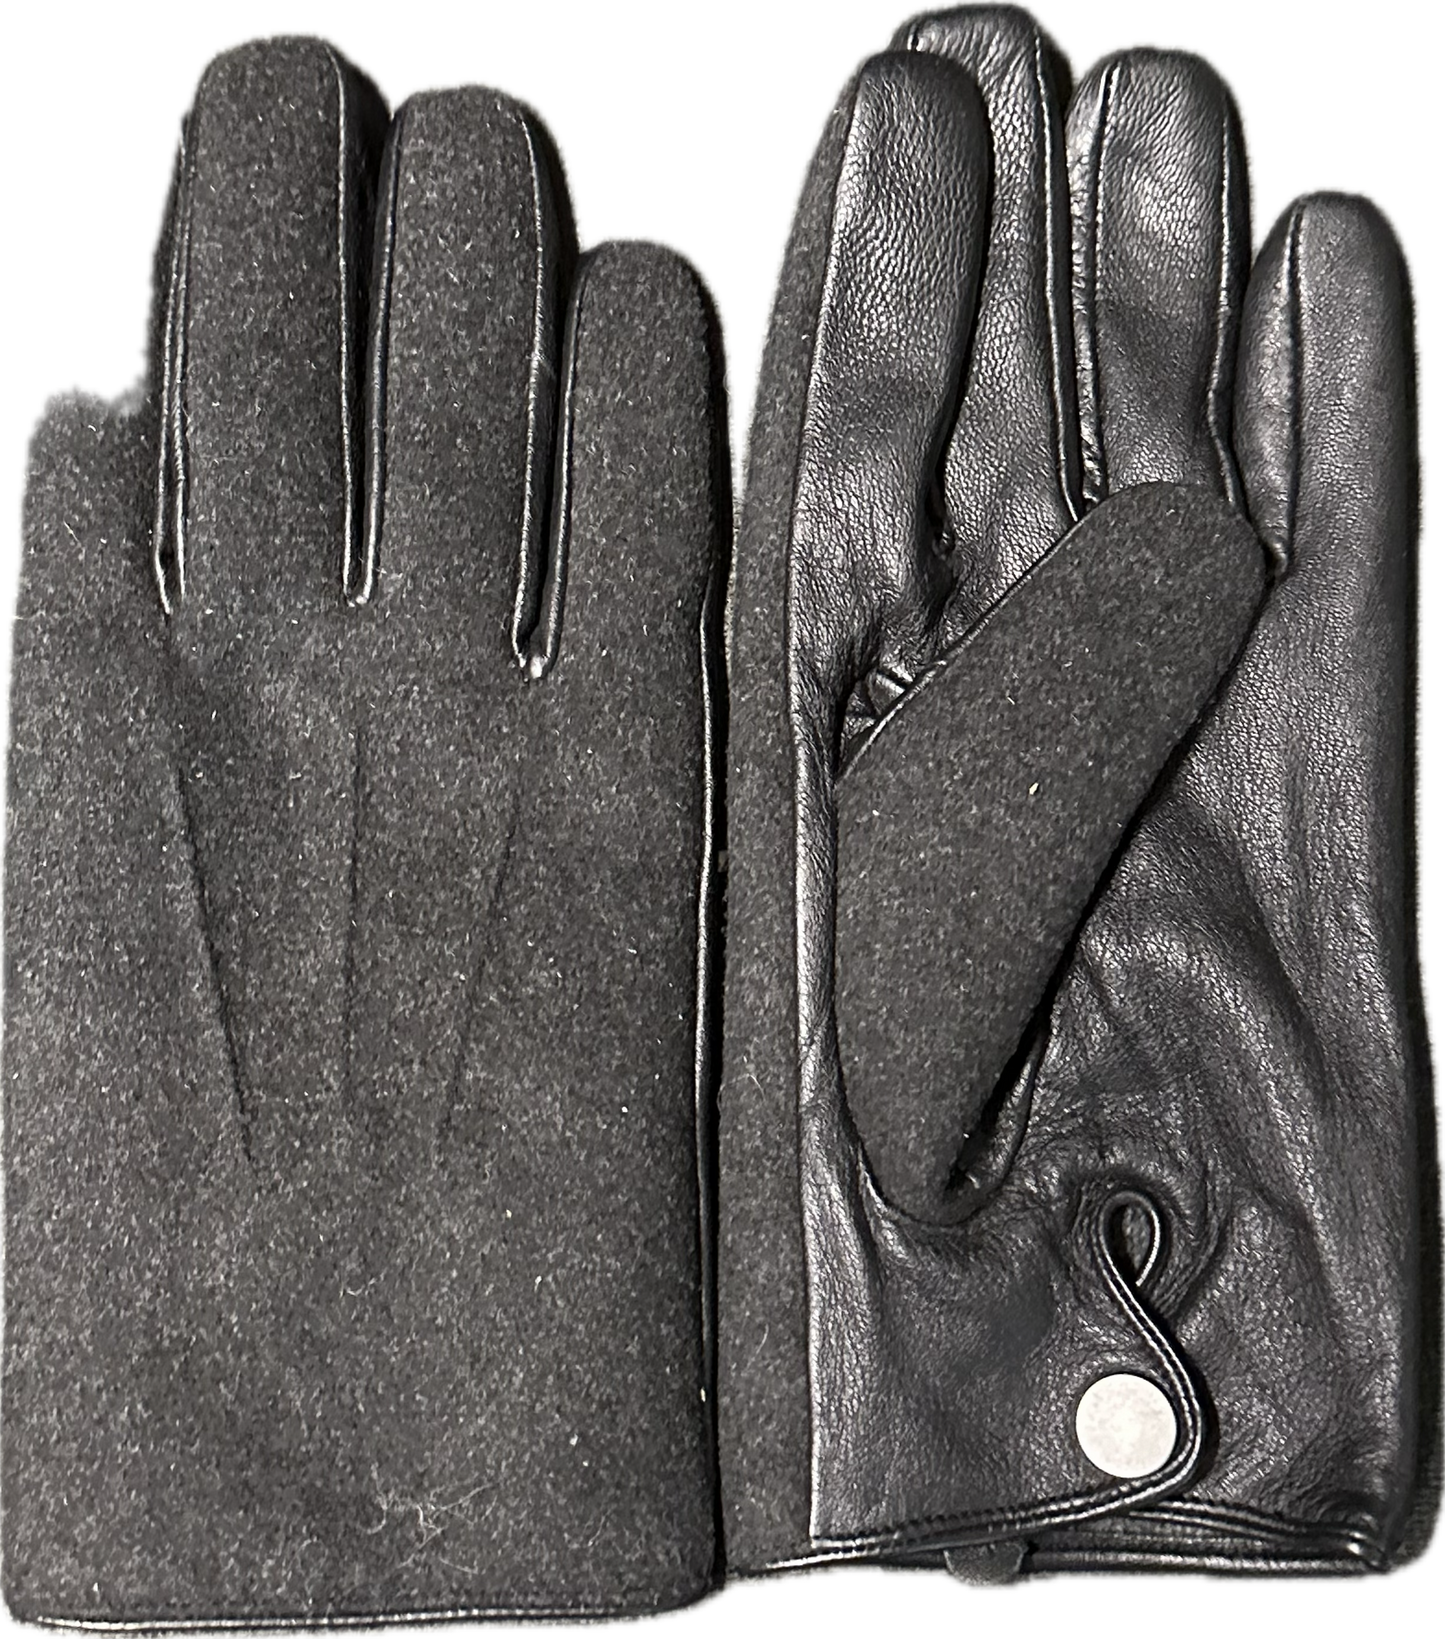 THE OFFICE: Ryan’s Black Leather Gloves